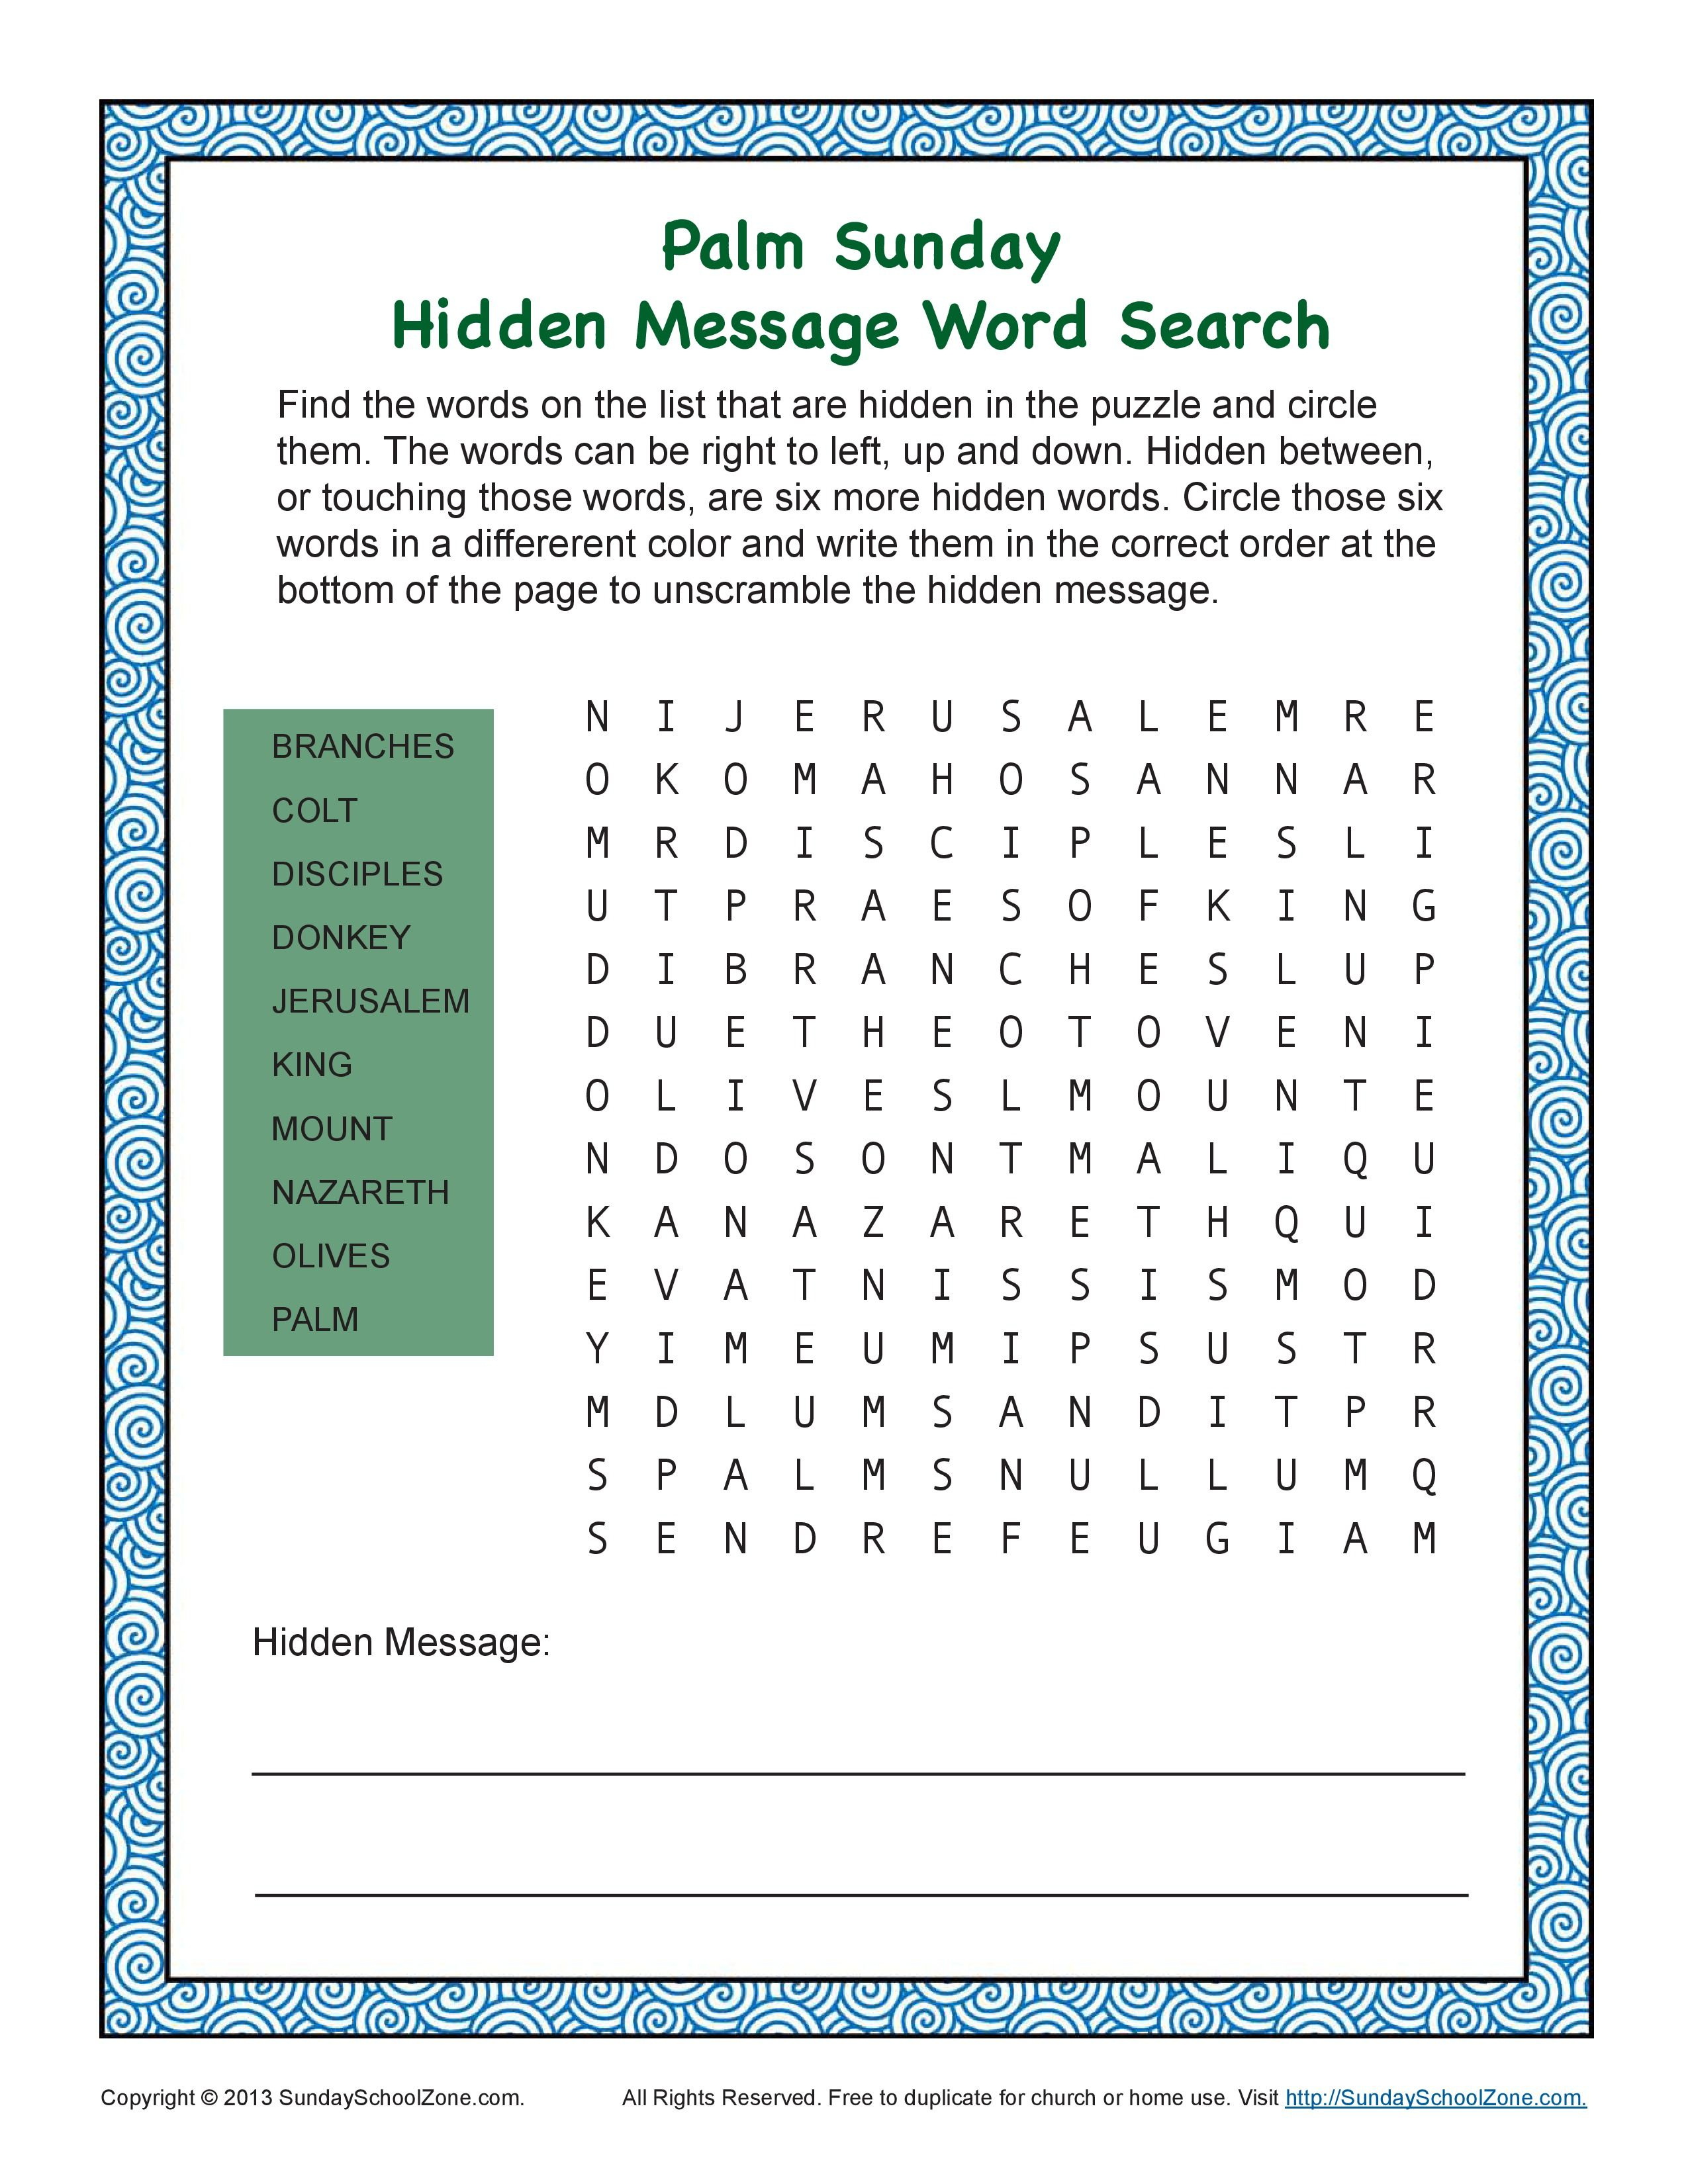 Palm Sunday Word Search Bible Activity On Sunday School Zone - Free Printable Catholic Word Search